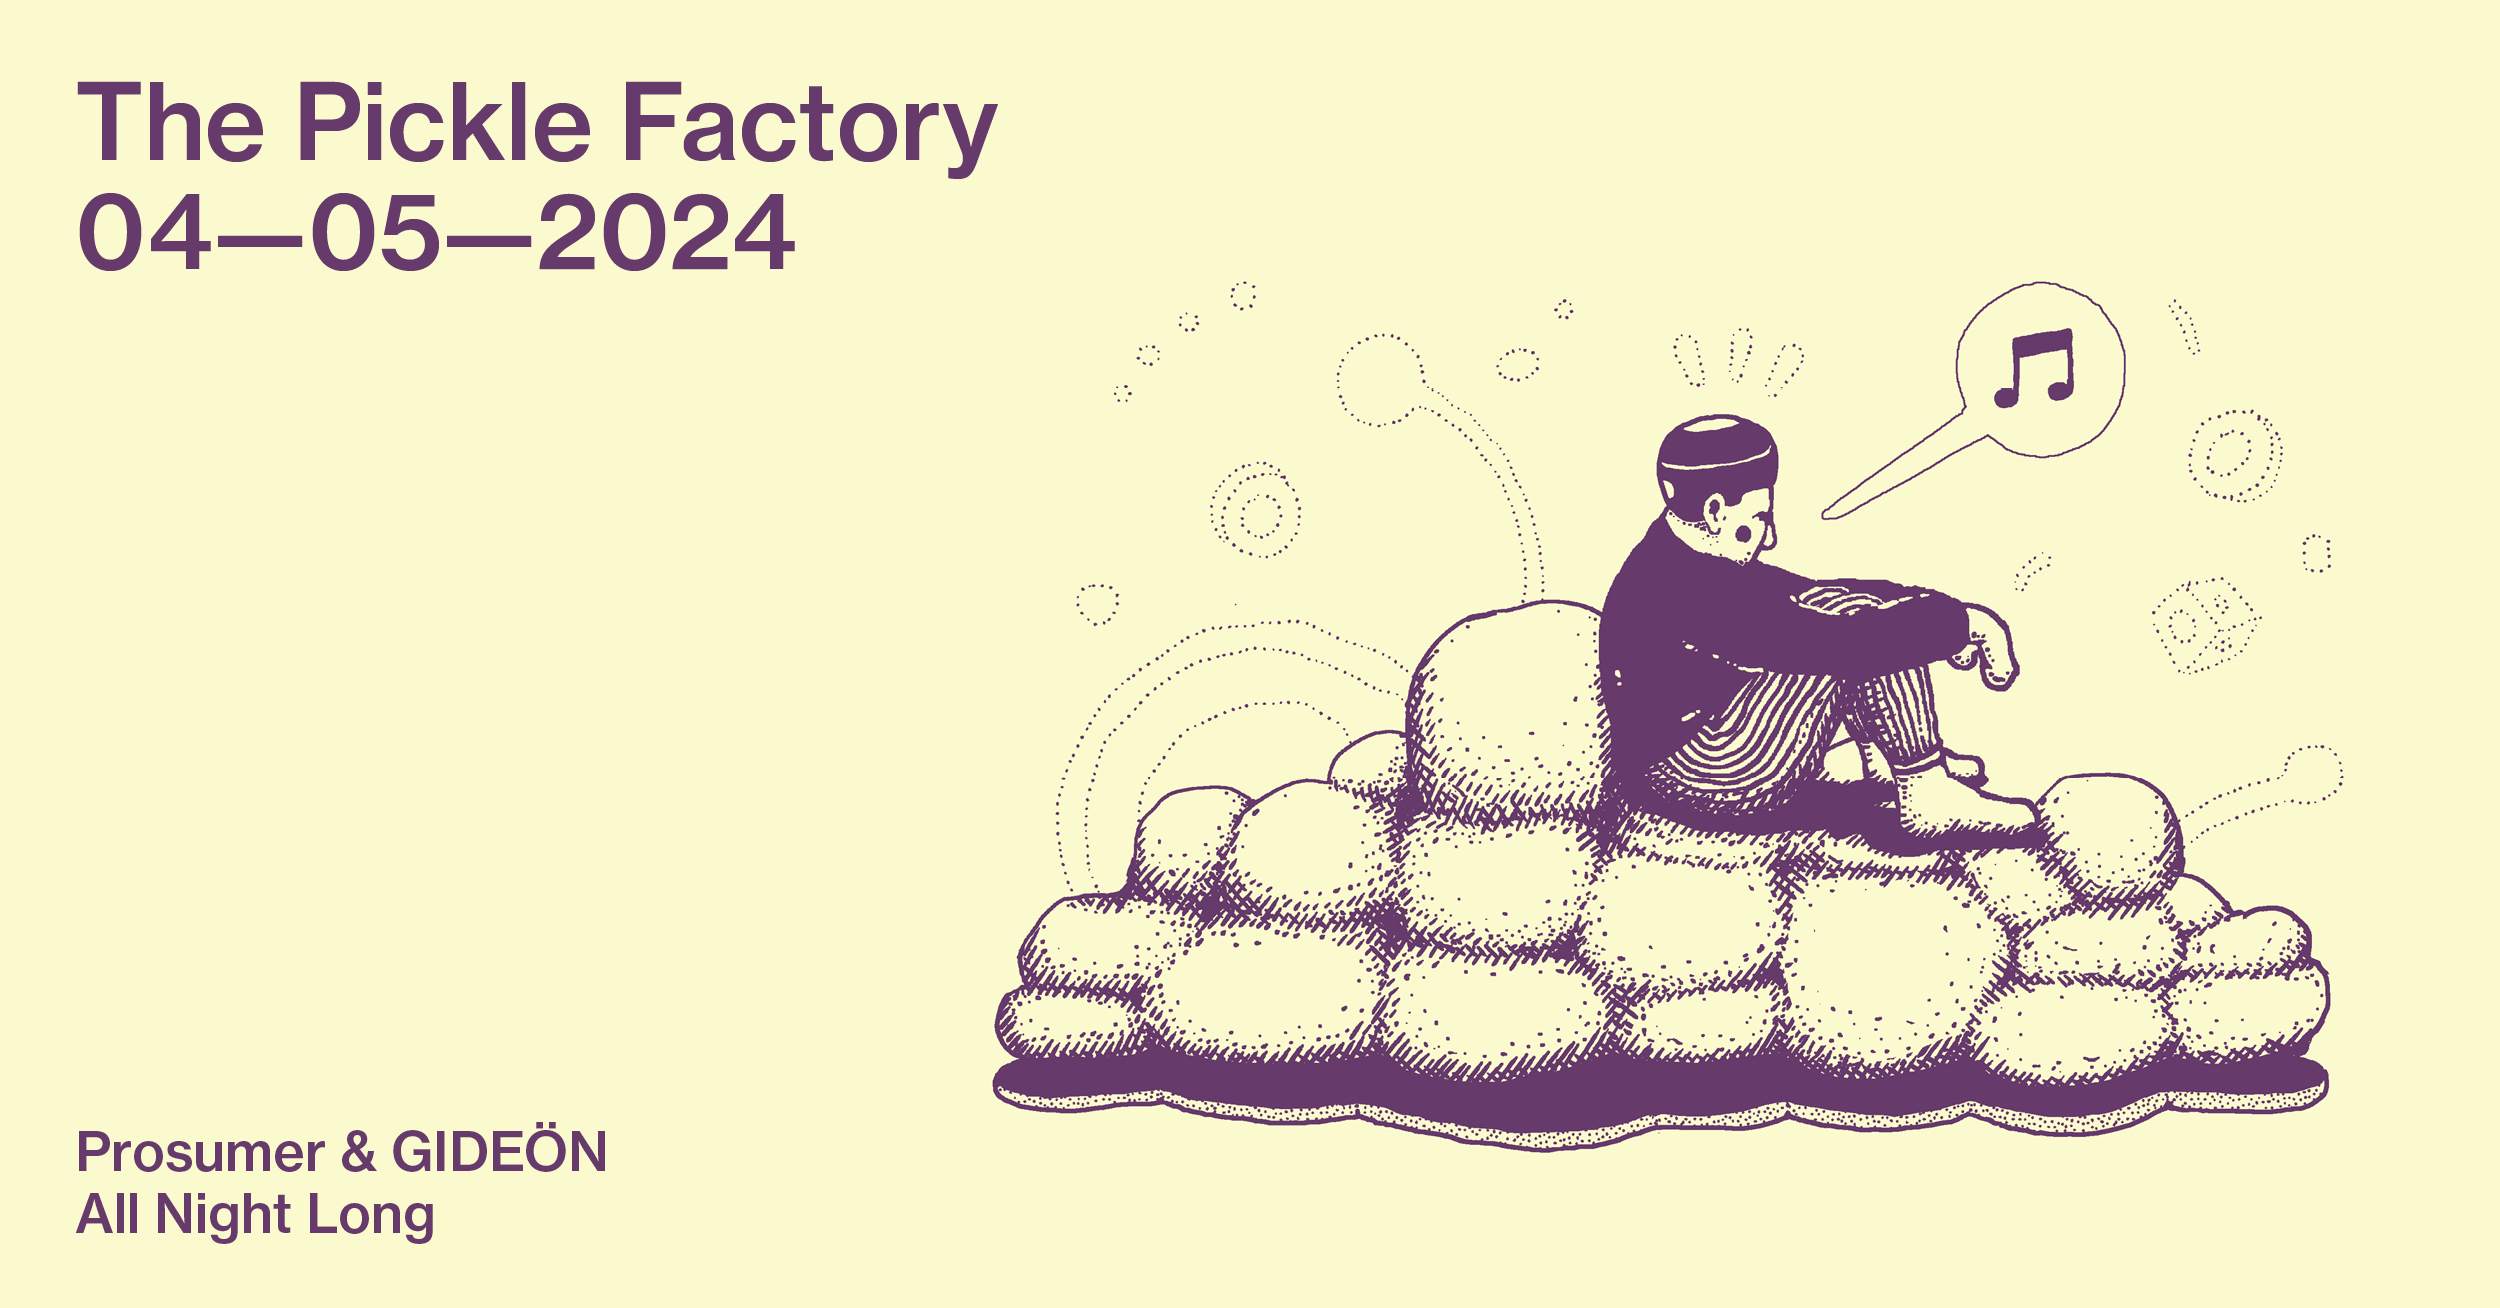 The Pickle Factory with Prosumer & GIDEÖN All Night Long - フライヤー表